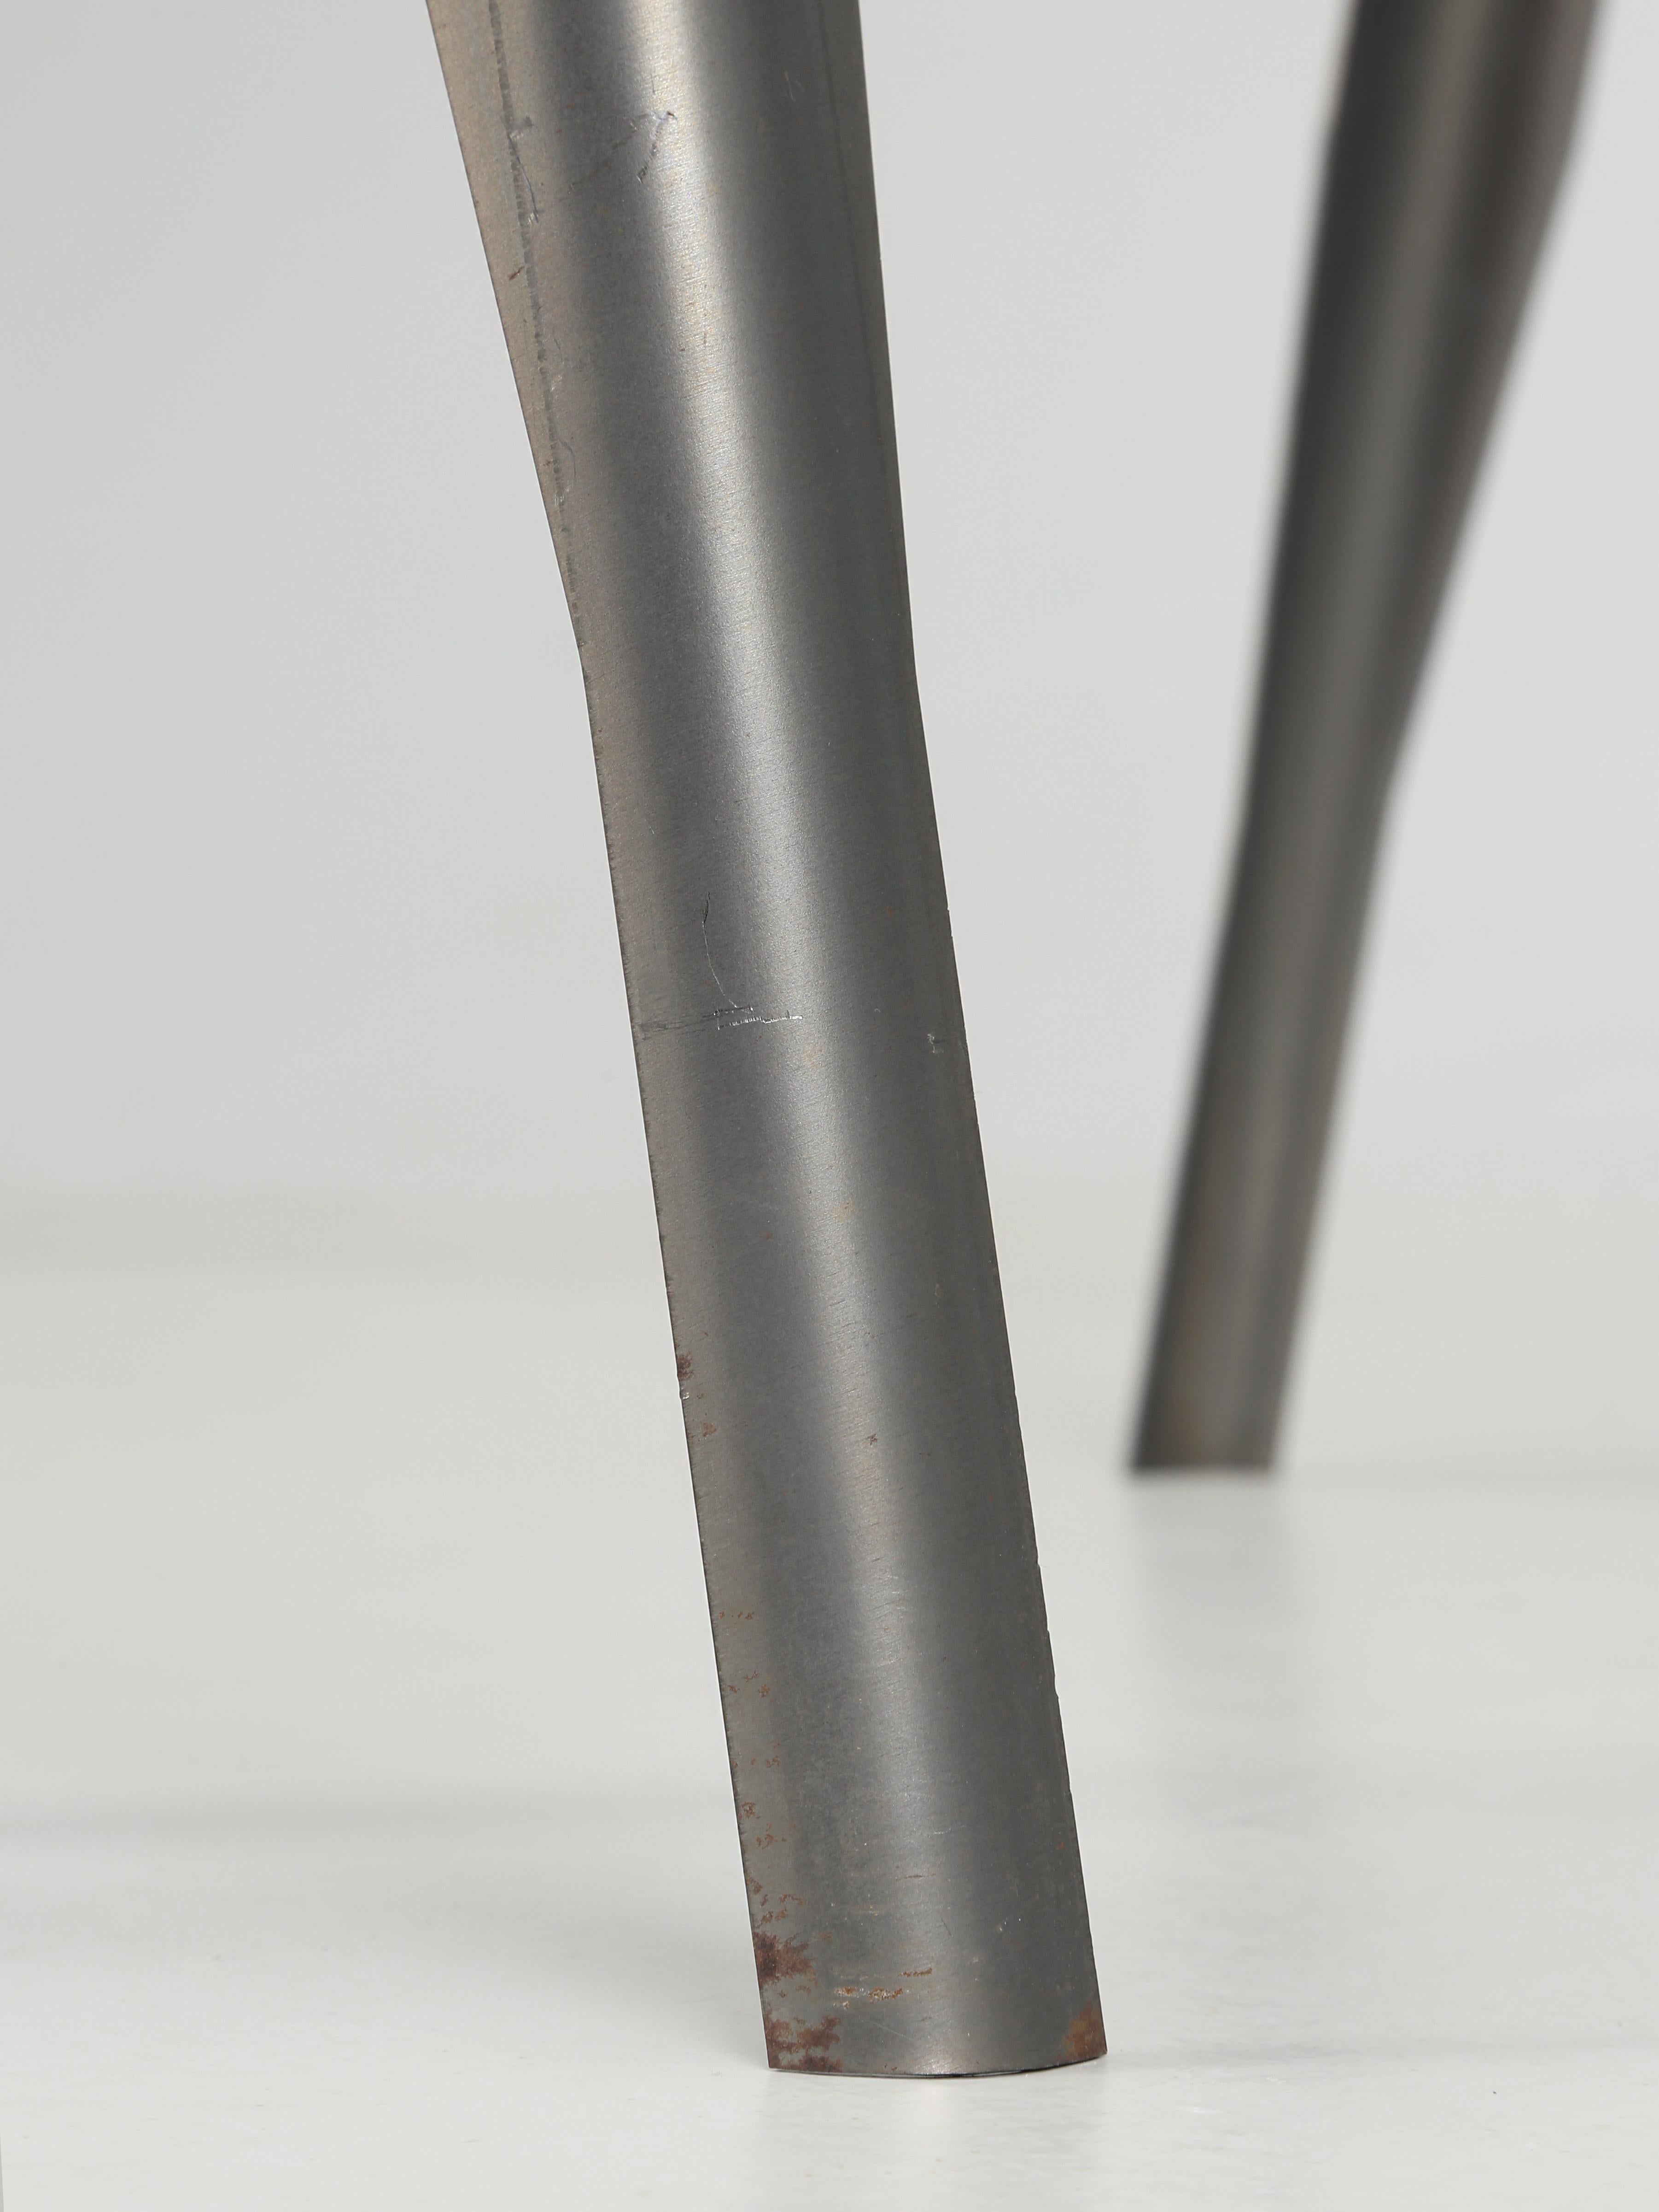 Genuine French Made Tolix Steel Trestle Table Legs, Table Top Not Included, New For Sale 3